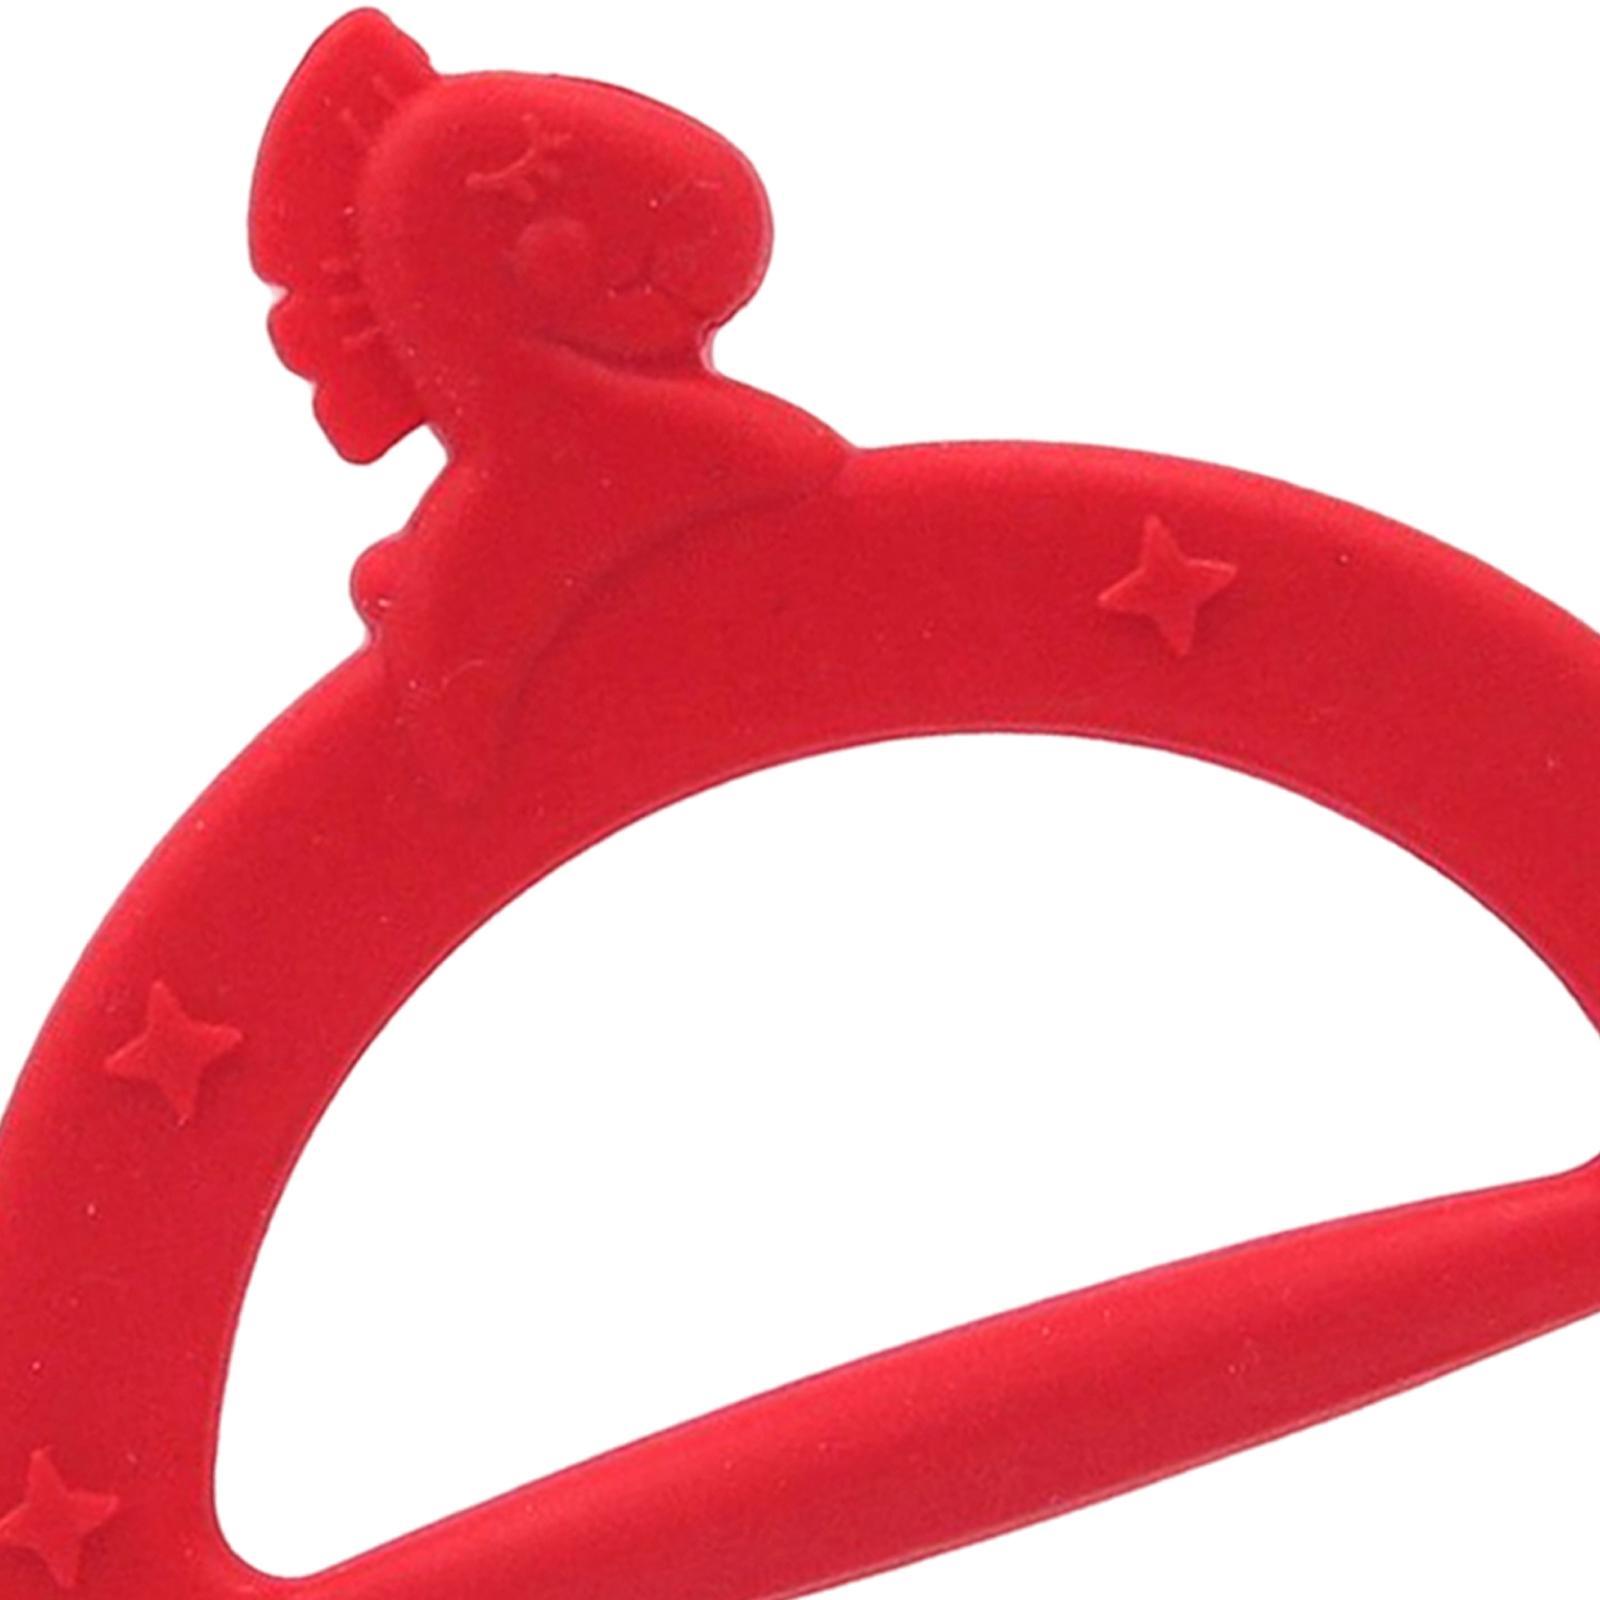 Baby Molar Stick Toy Teething Teether Infants Red